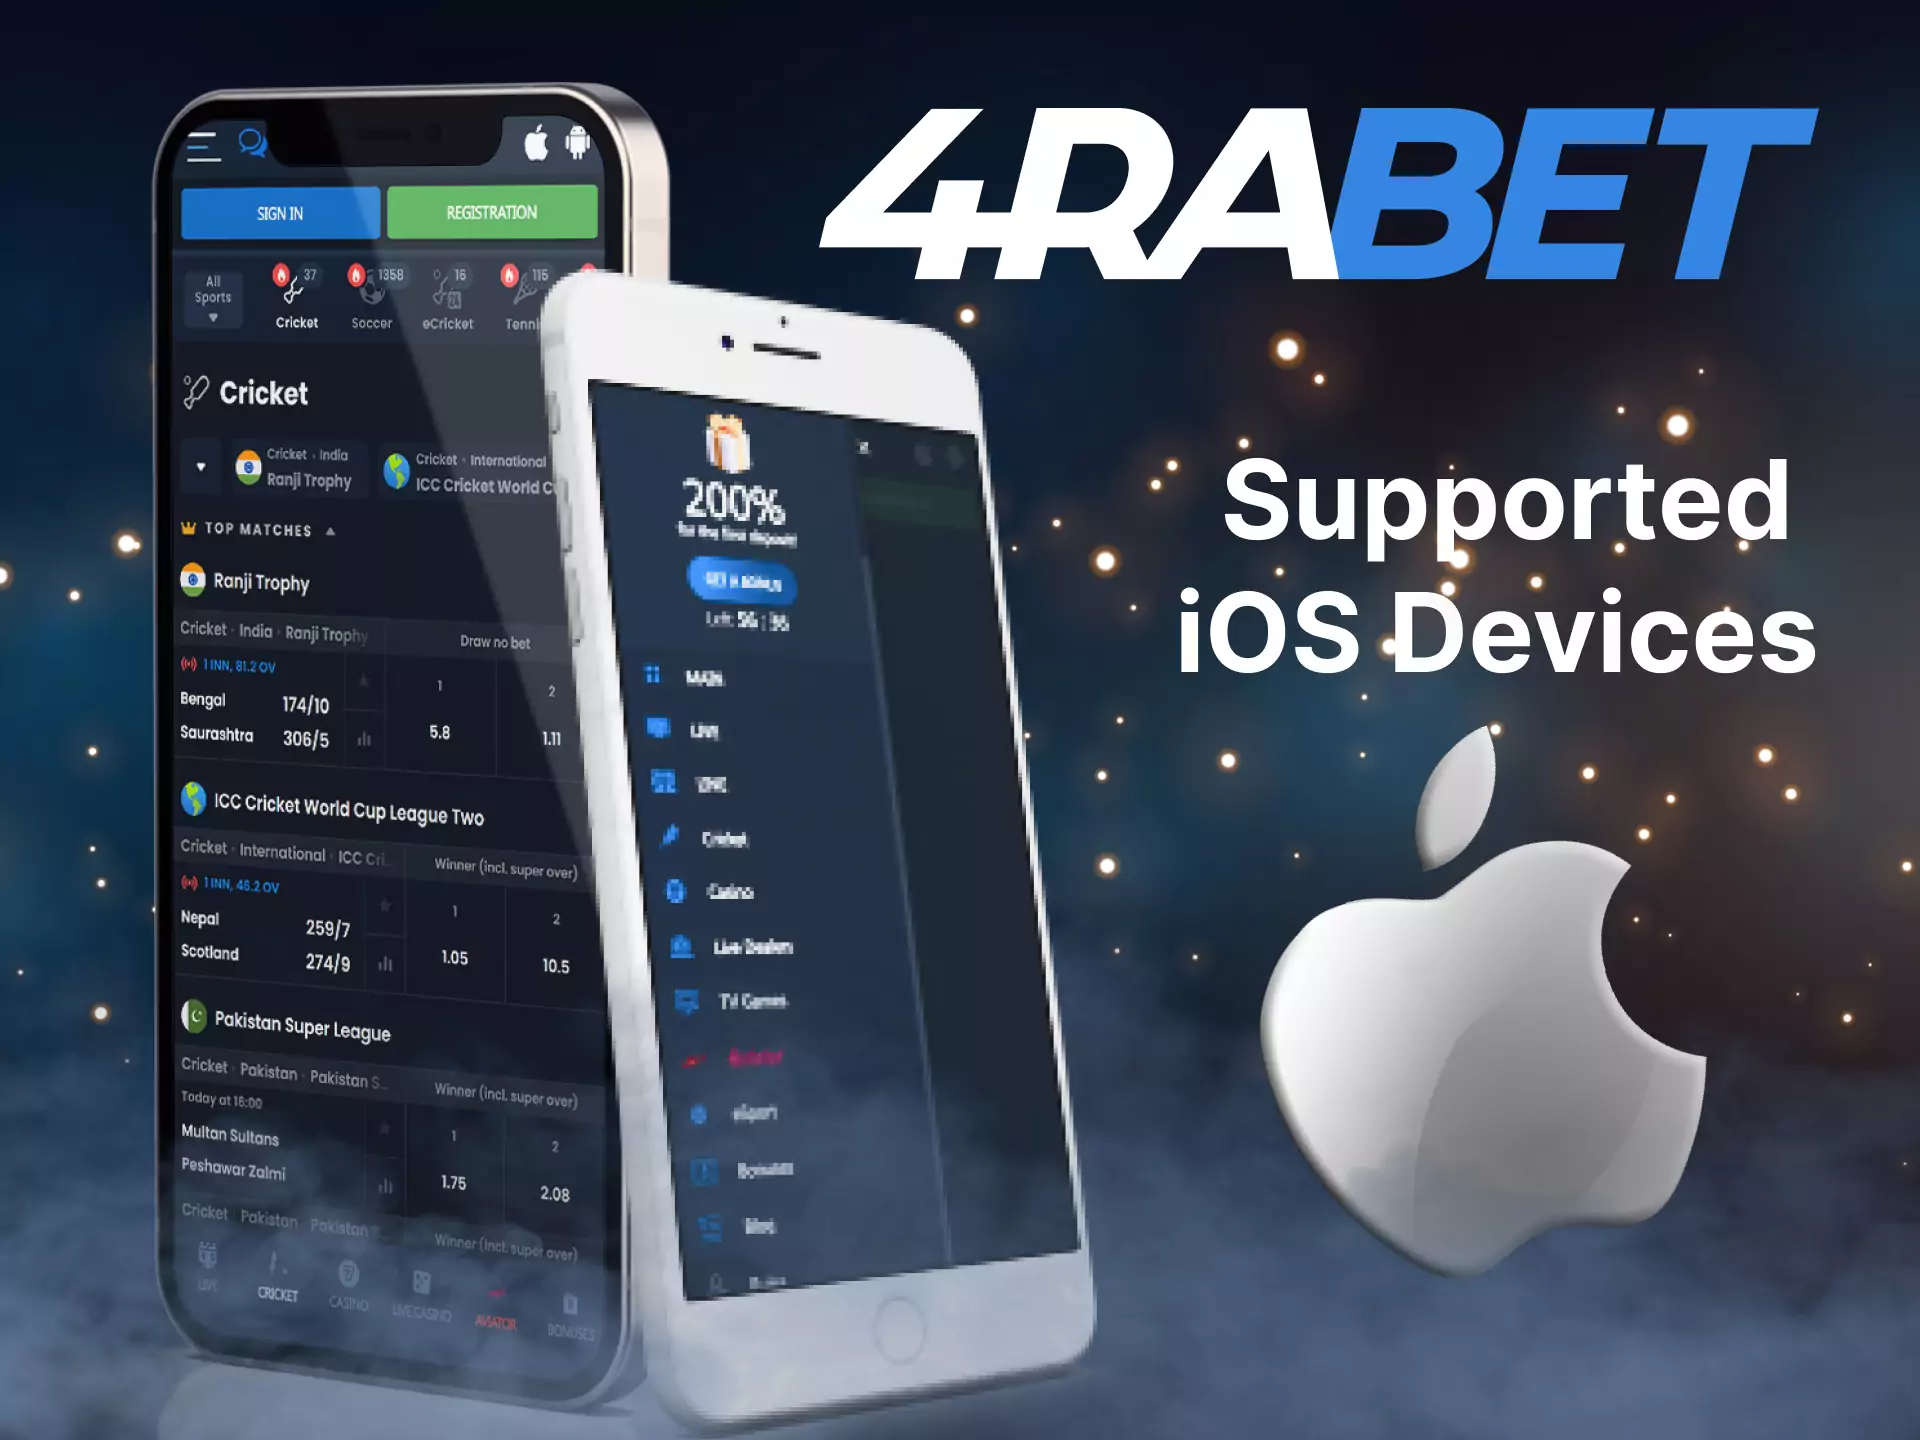 The 4rabet mobile app is supported on many iOS devices.